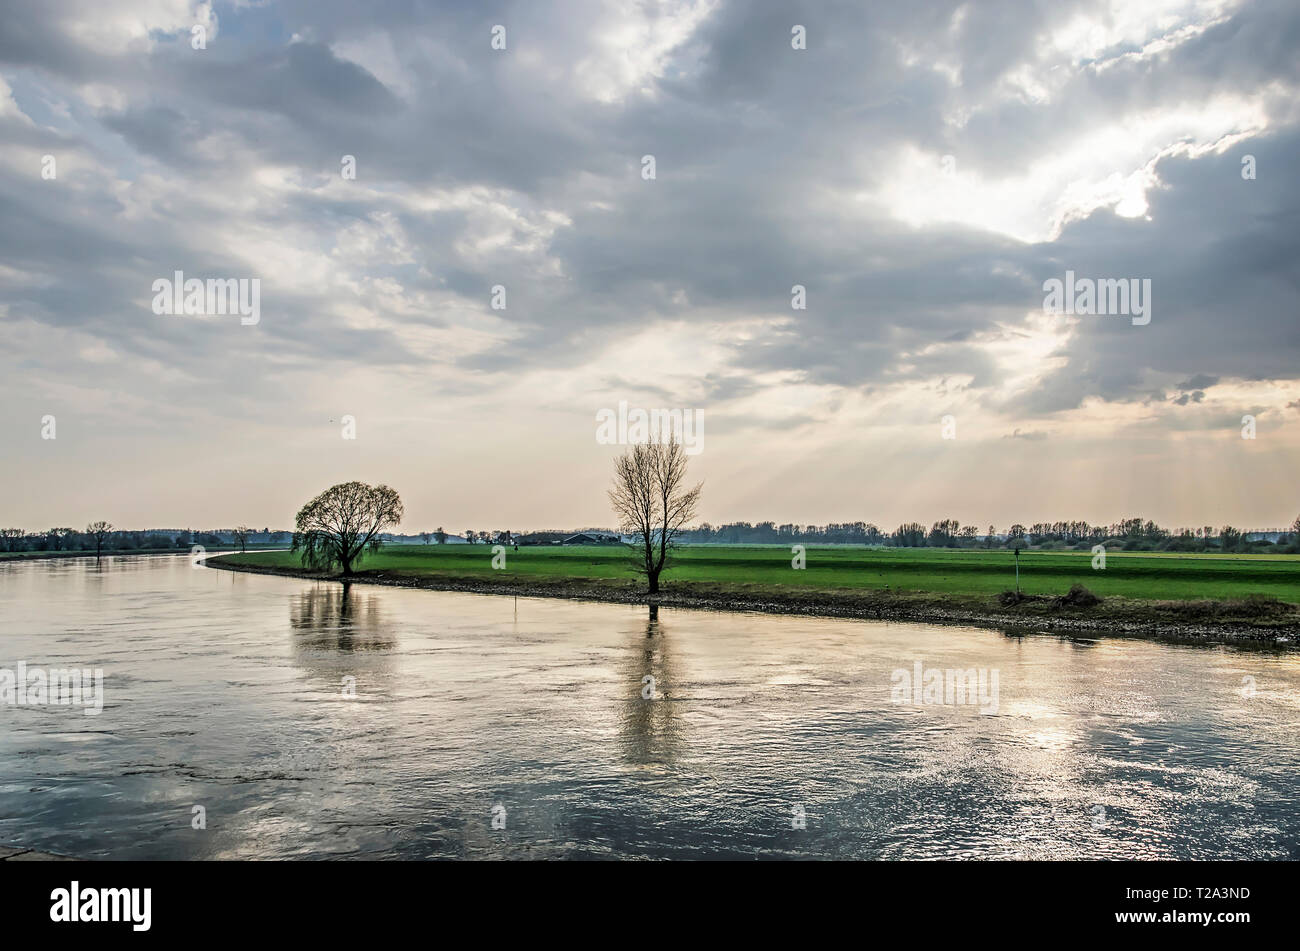 Looking upstream at the IJssel river from the waterfront of the town of Doesburg, The Netherlands under a dramatic sky on an afternoon in springtime Stock Photo